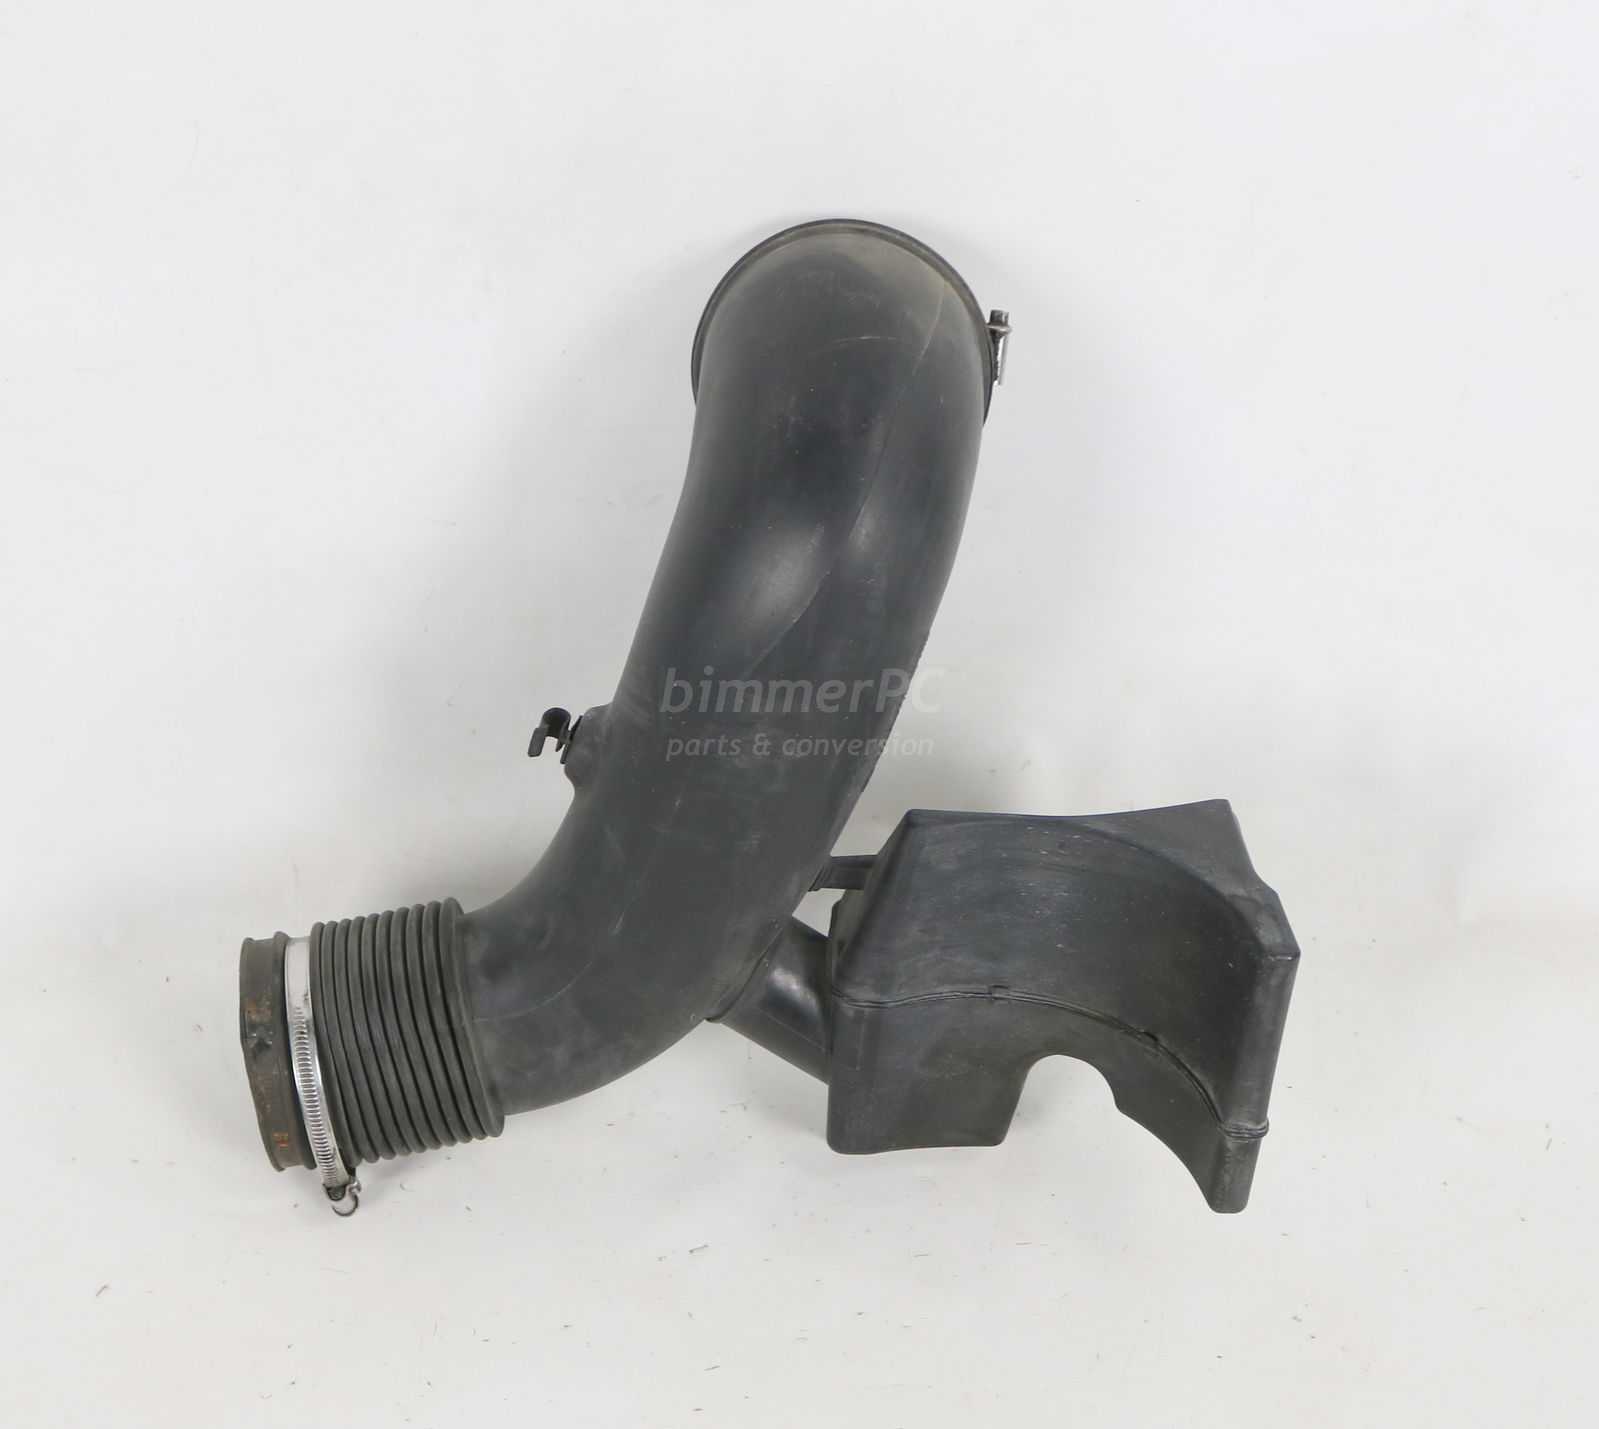 BMW E53 X5 3.0i Air Intake Duct Tube Rubber Boot Top Half M54 6cyl 2000-2006 OEM